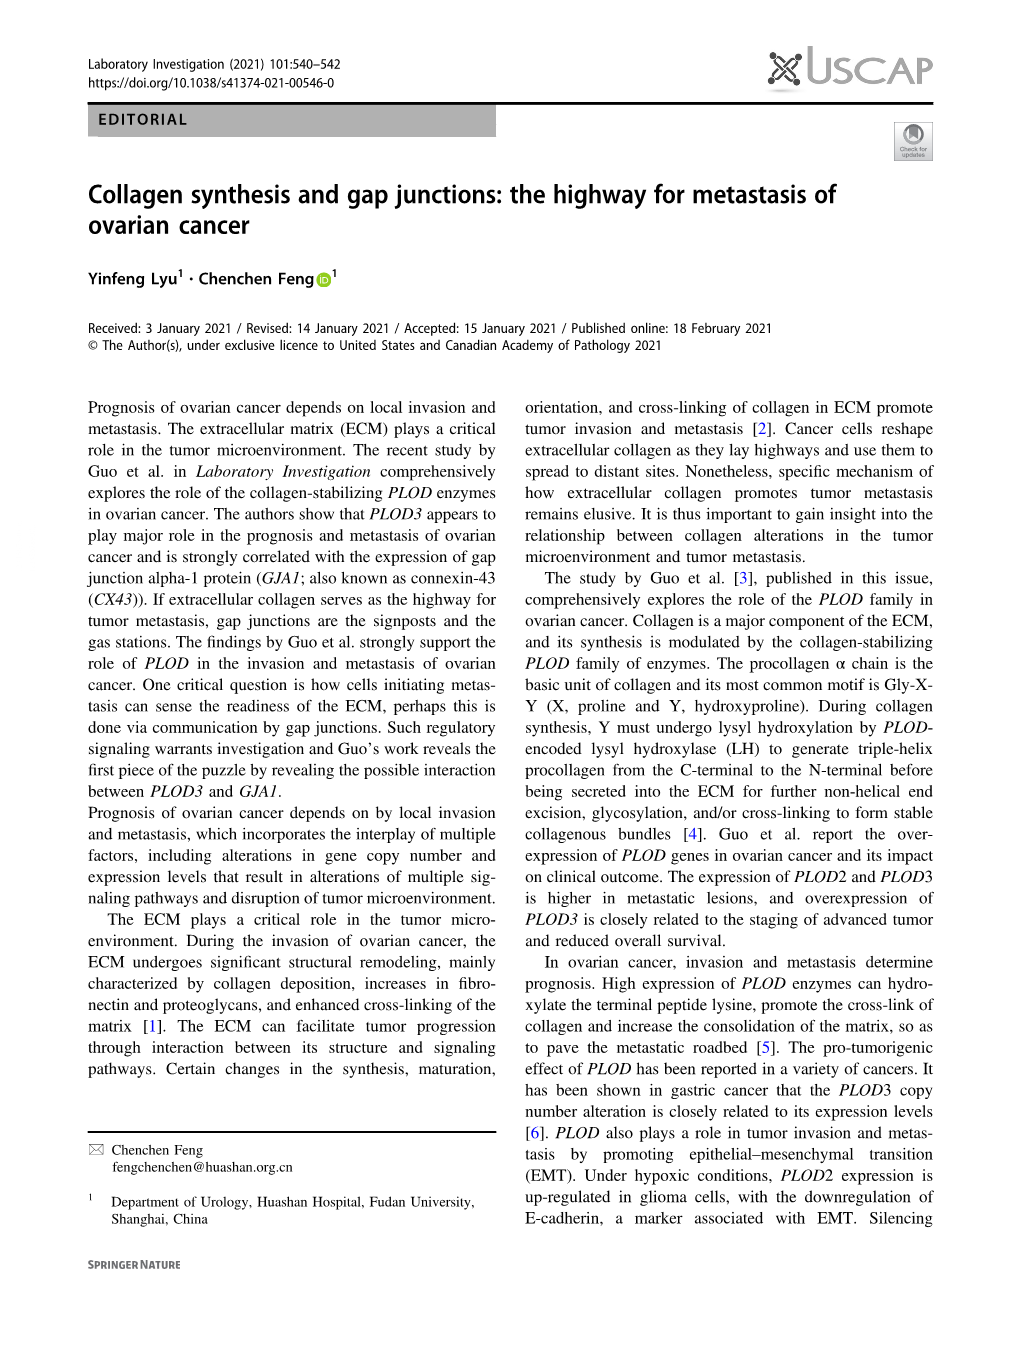 Collagen Synthesis and Gap Junctions: the Highway for Metastasis of Ovarian Cancer